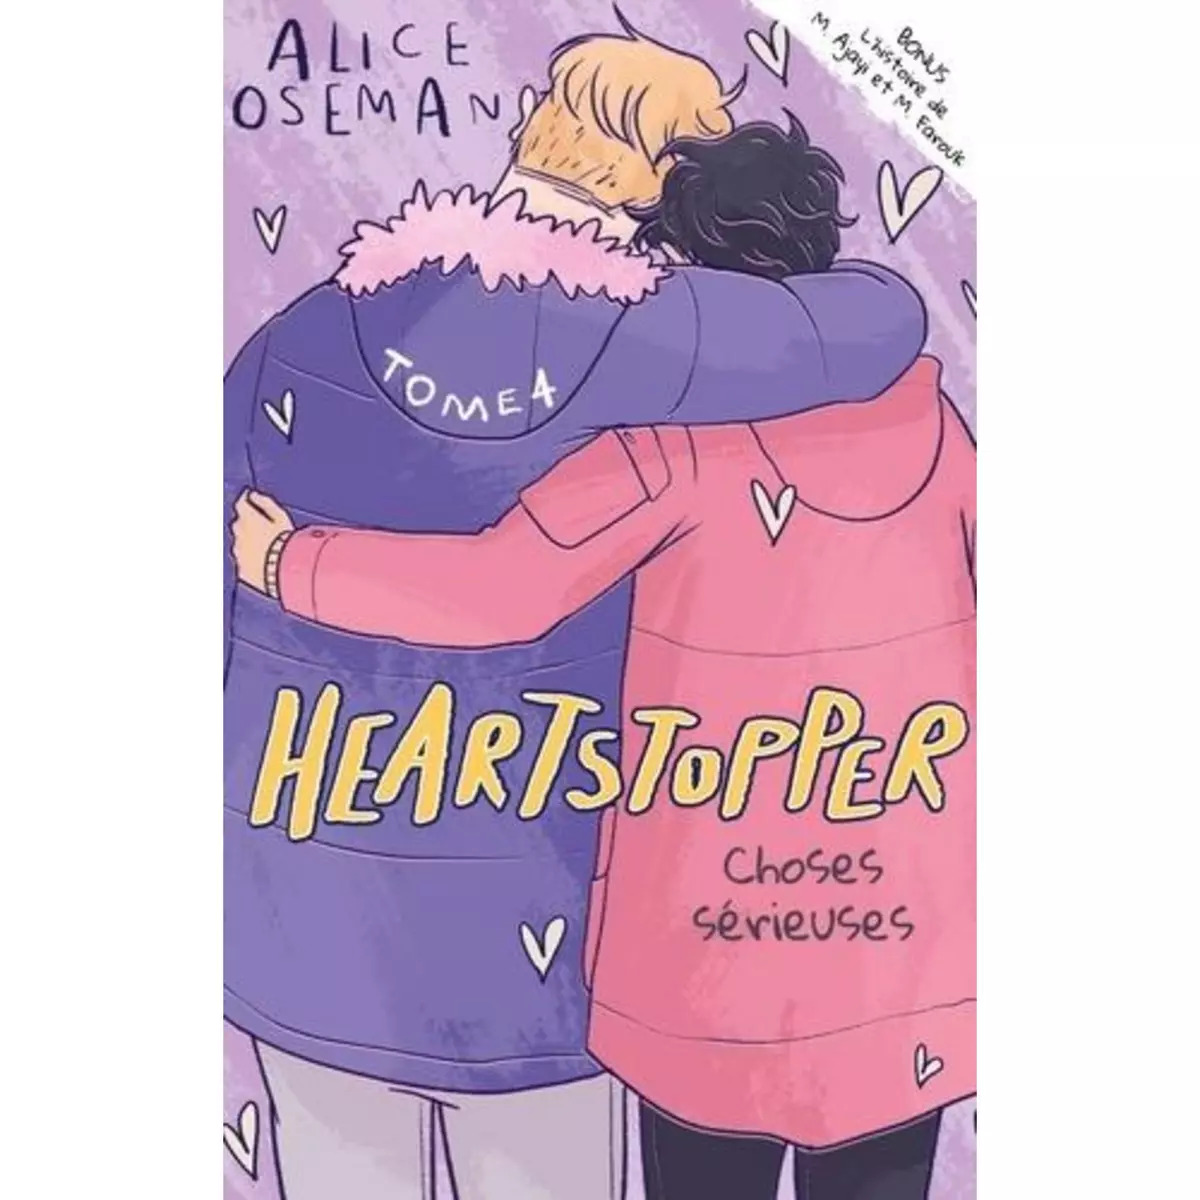  HEARTSTOPPER TOME 4 : CHOSES SERIEUSES, Oseman Alice